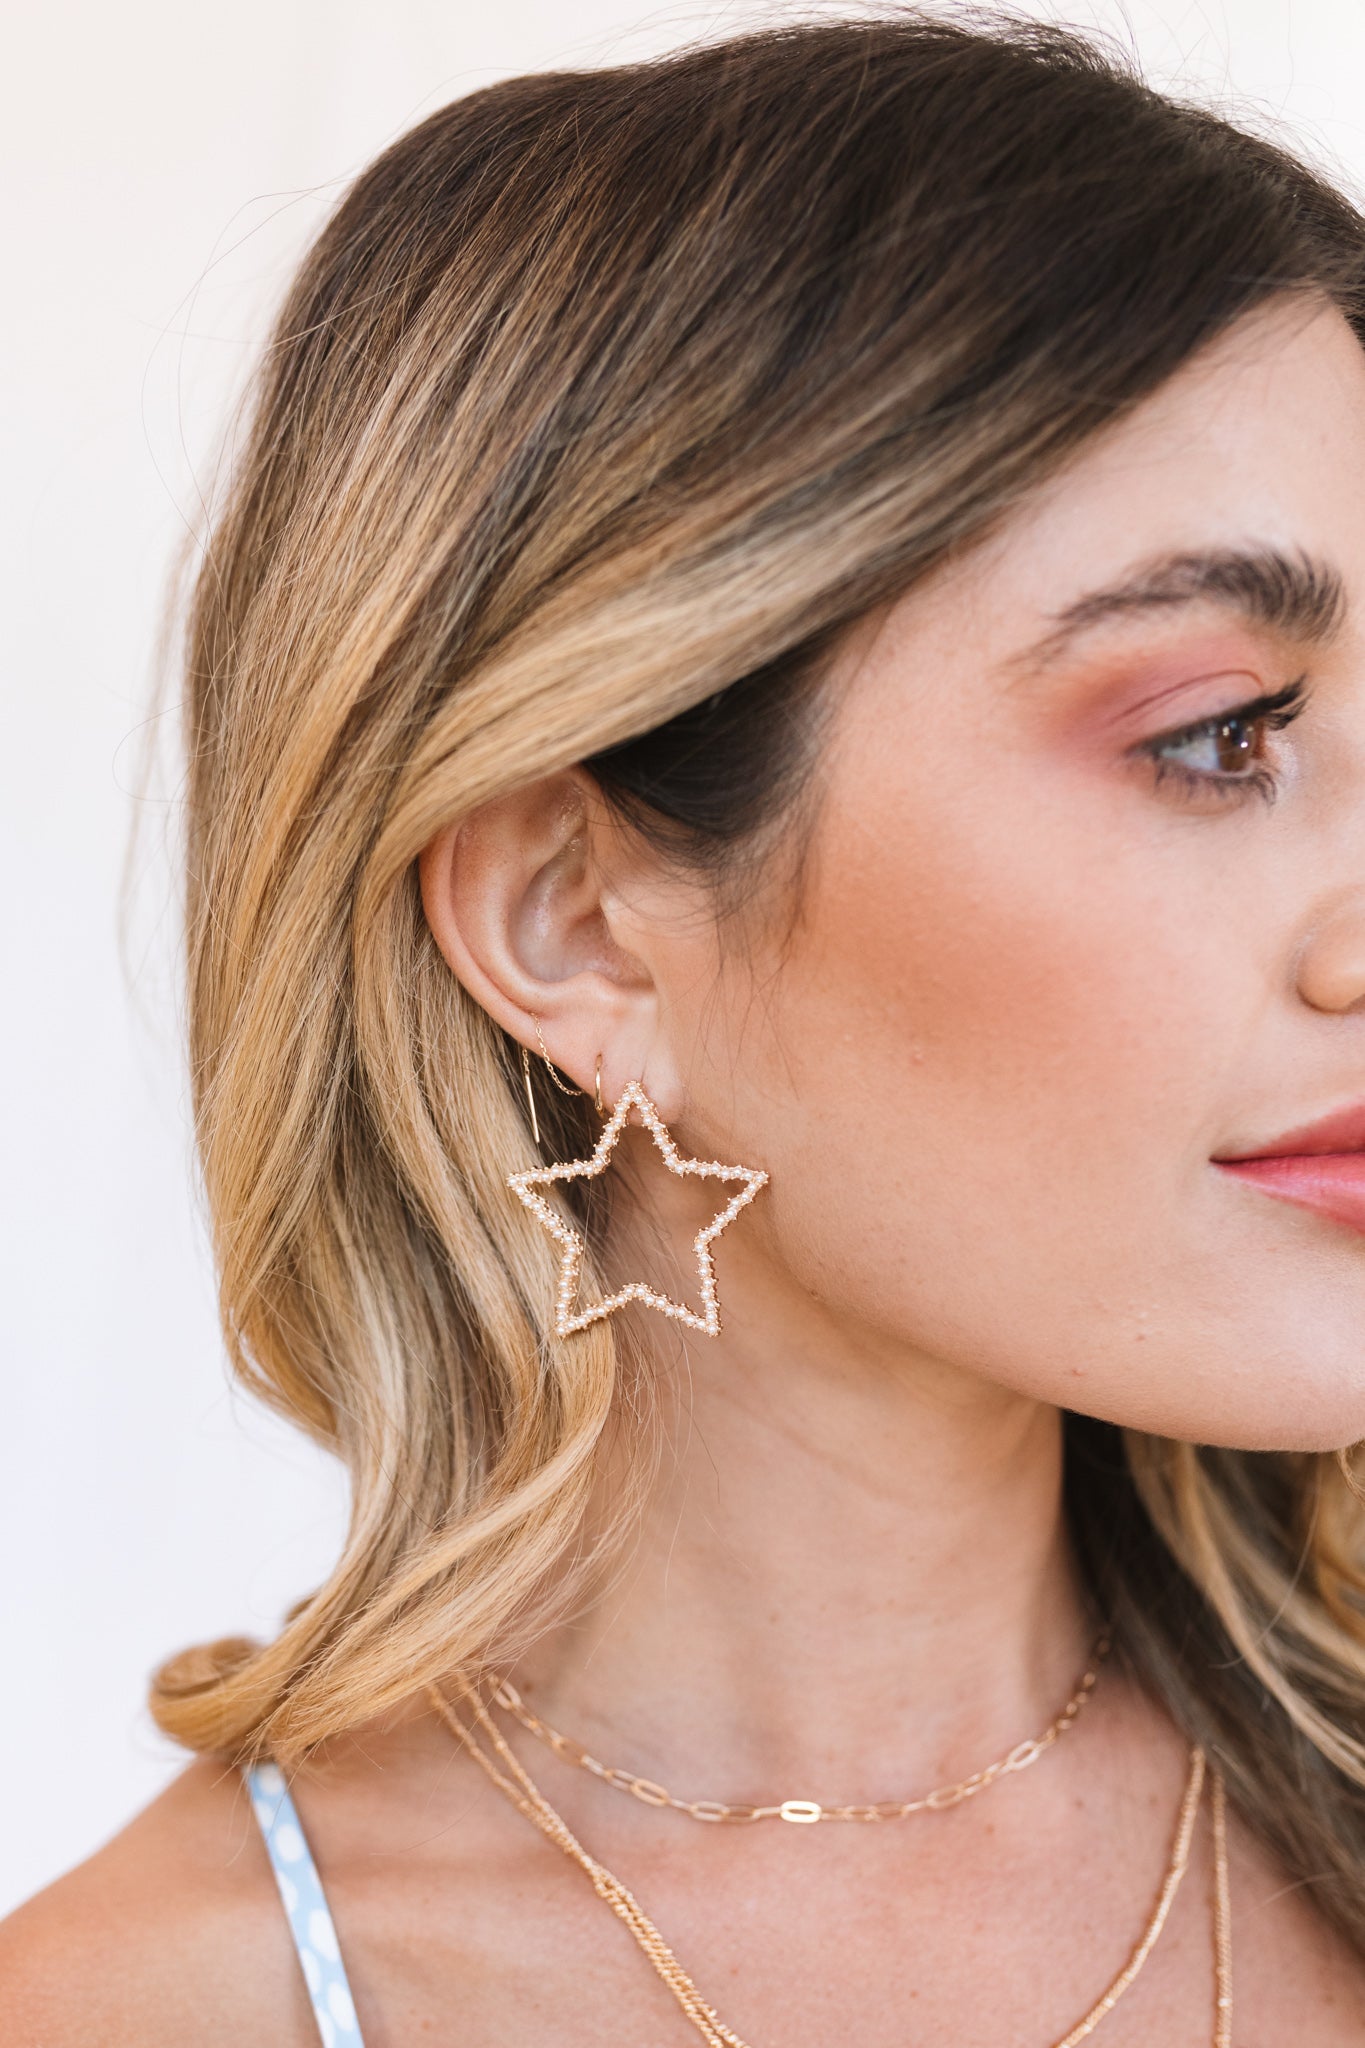 Counting Stars Earrings